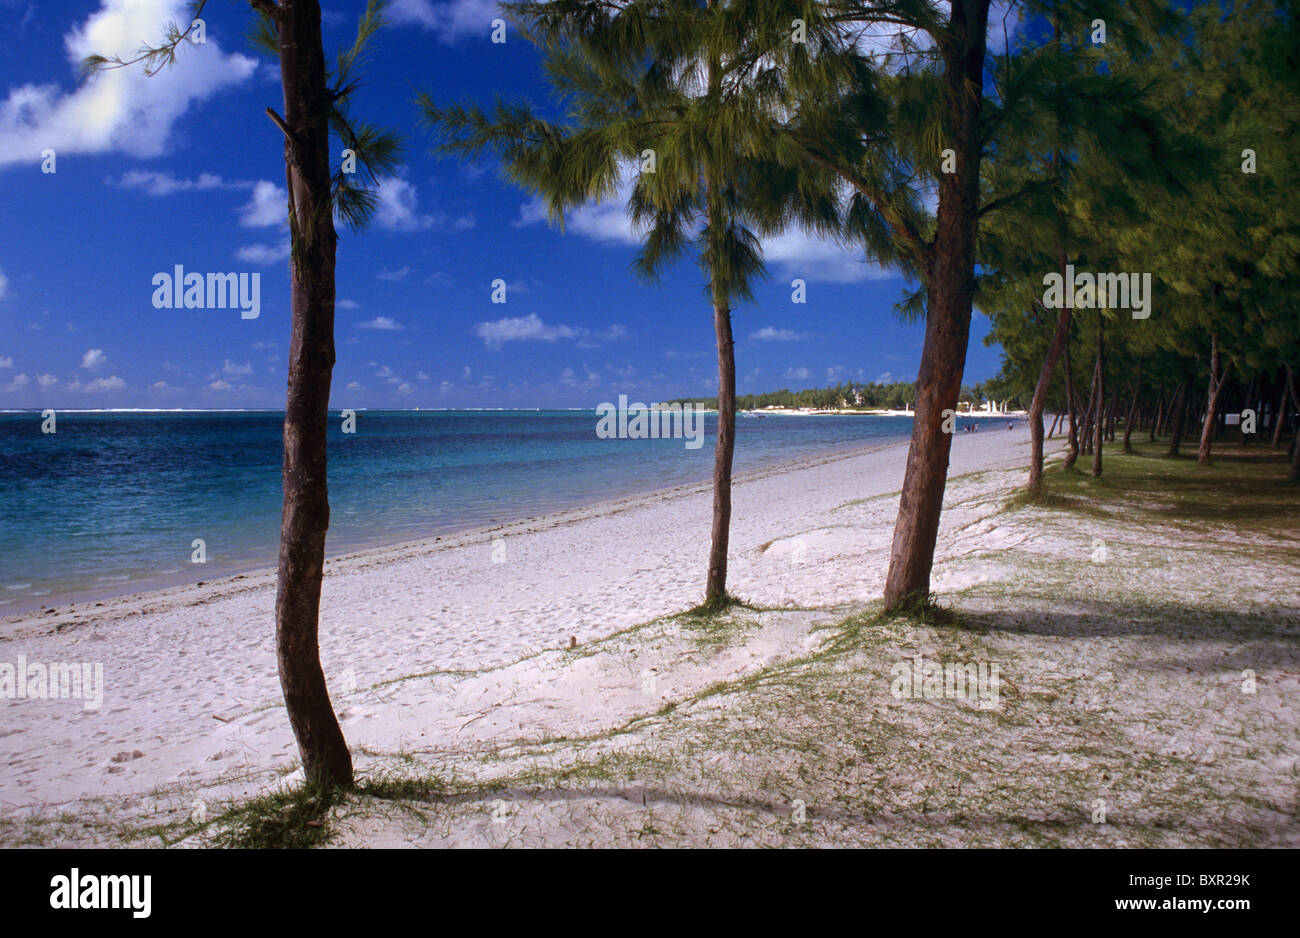 Deserted Belle Mare Beach, with Whistling Pines or Whistling Pine Trees, Casuarina equisetifolia, Mauritius Stock Photo